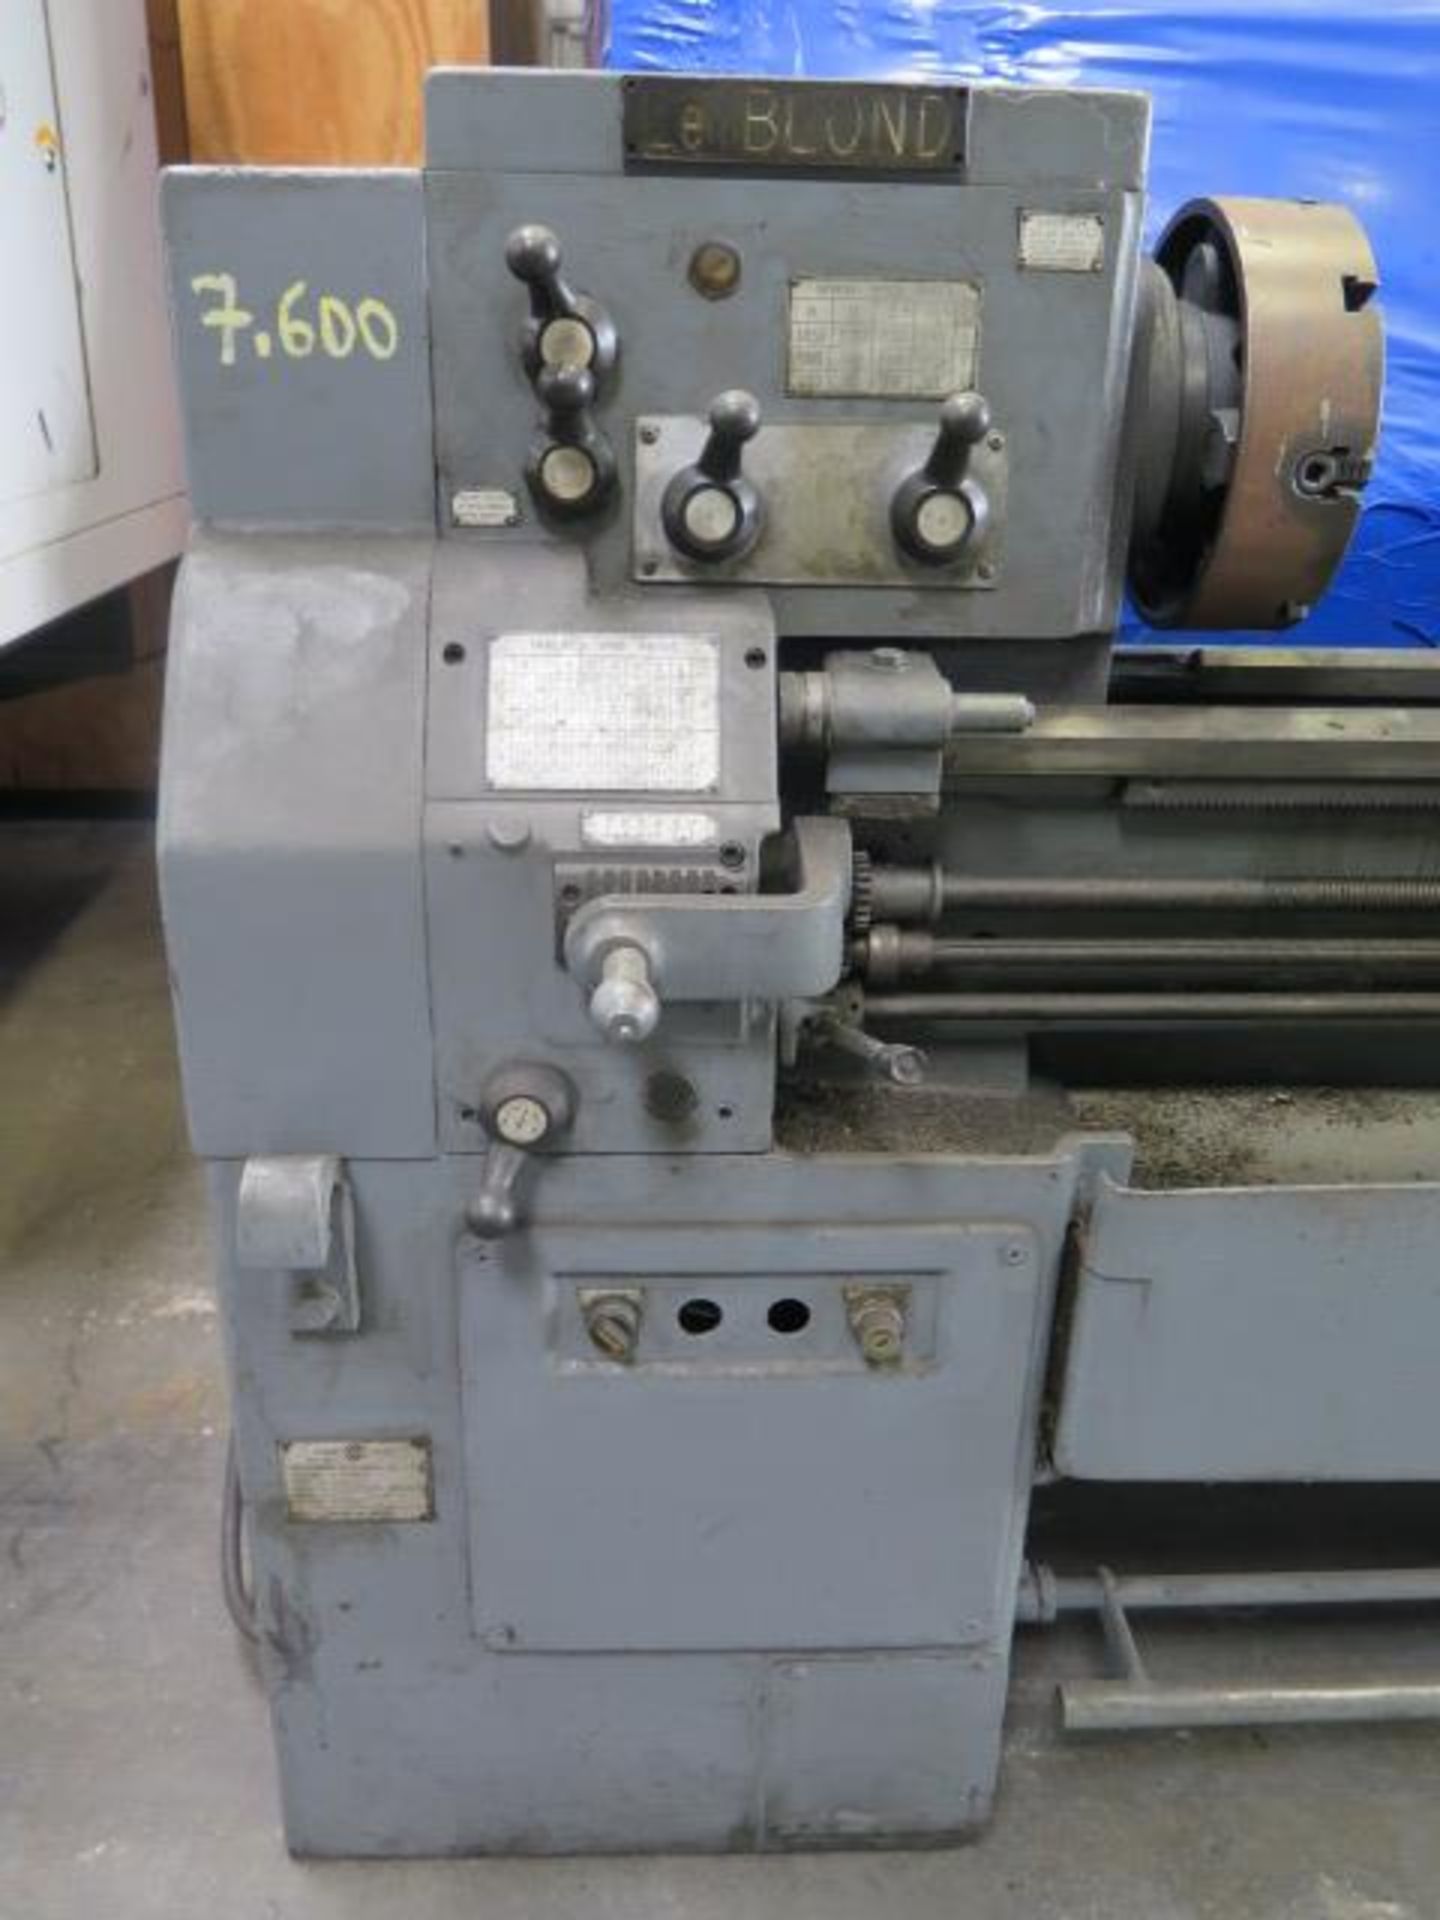 LeBlond 16” x 42” Geared Head Lathe w/ 50-1850 RPM, Inch Threading, 12” 4-Jaw Chuck, SOLD AS IS - Image 4 of 12